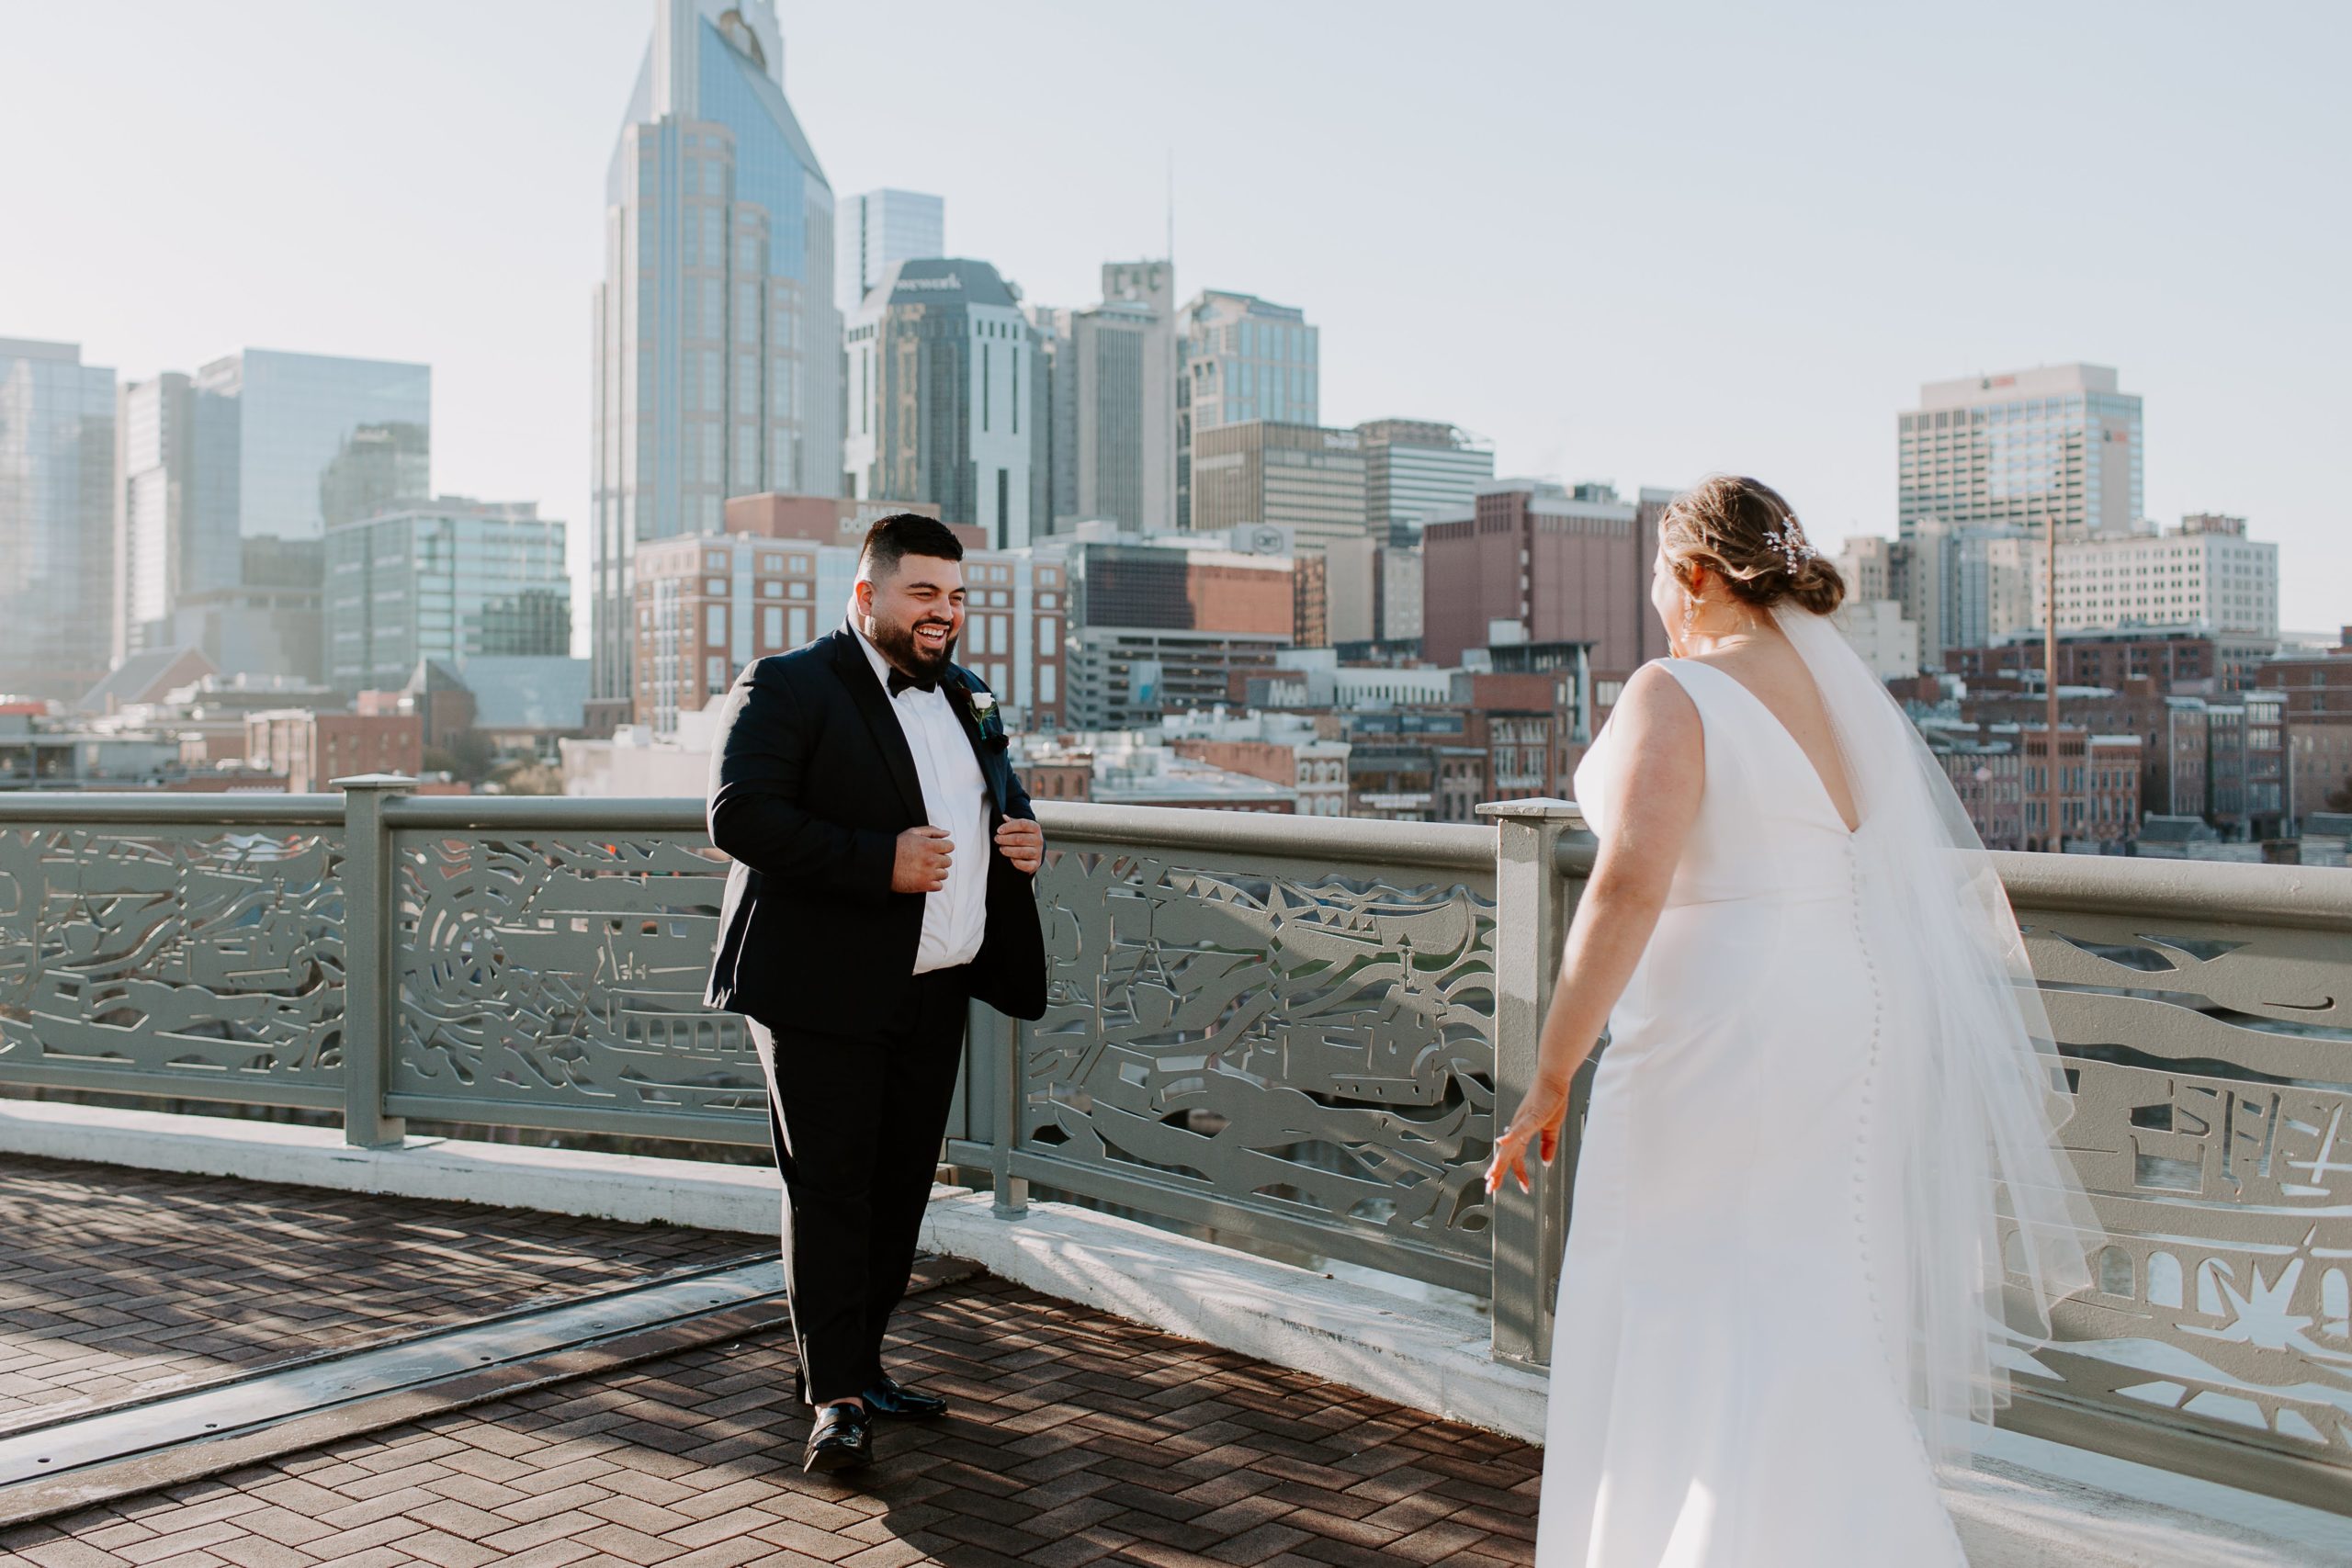 Man smiling so big after seeing his bride for the first time all dressed up as they do their first look on the pedestrian bridge in Nashville, Tennessee